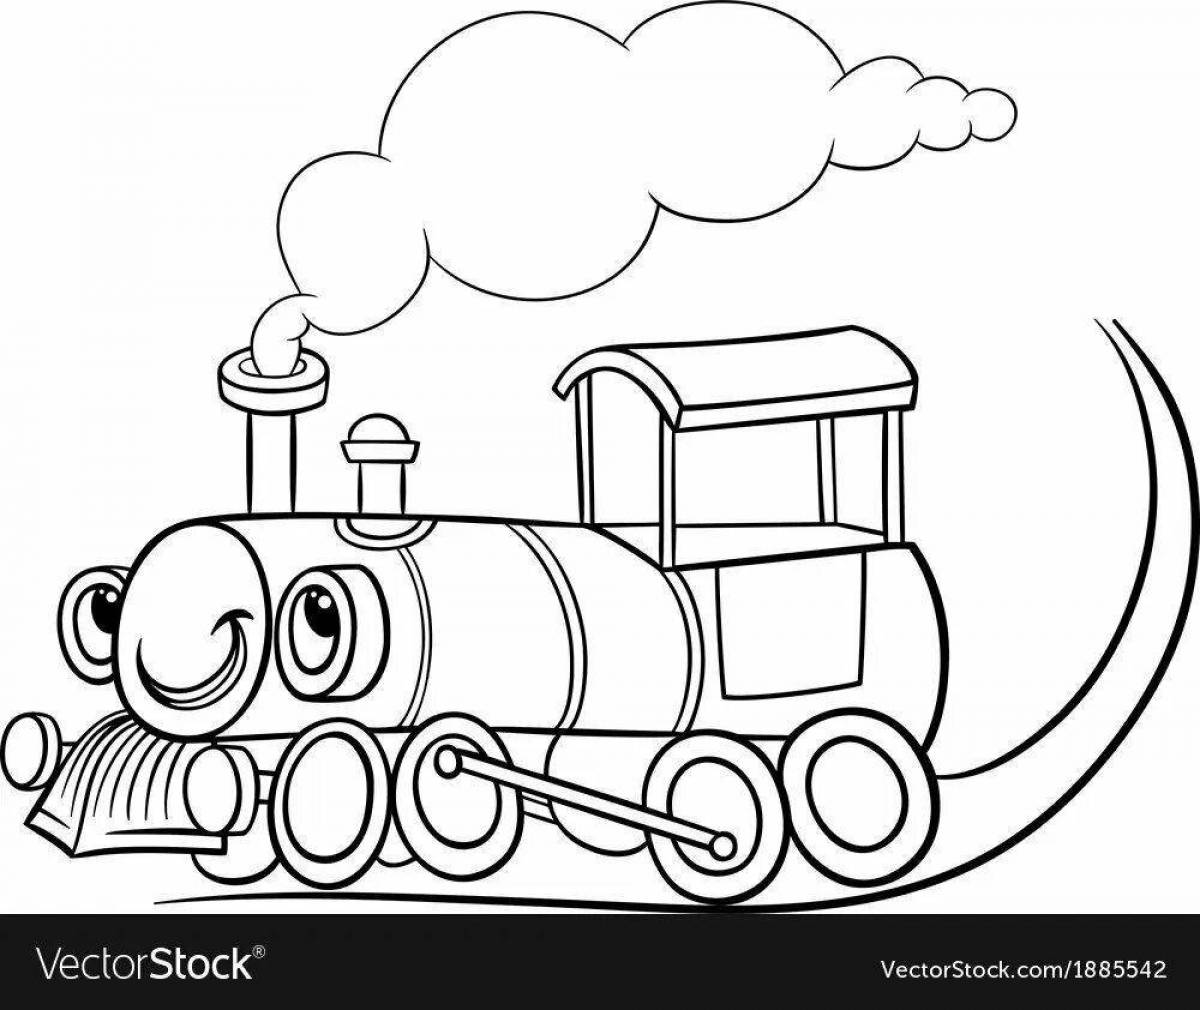 Flawless locomotive coloring page